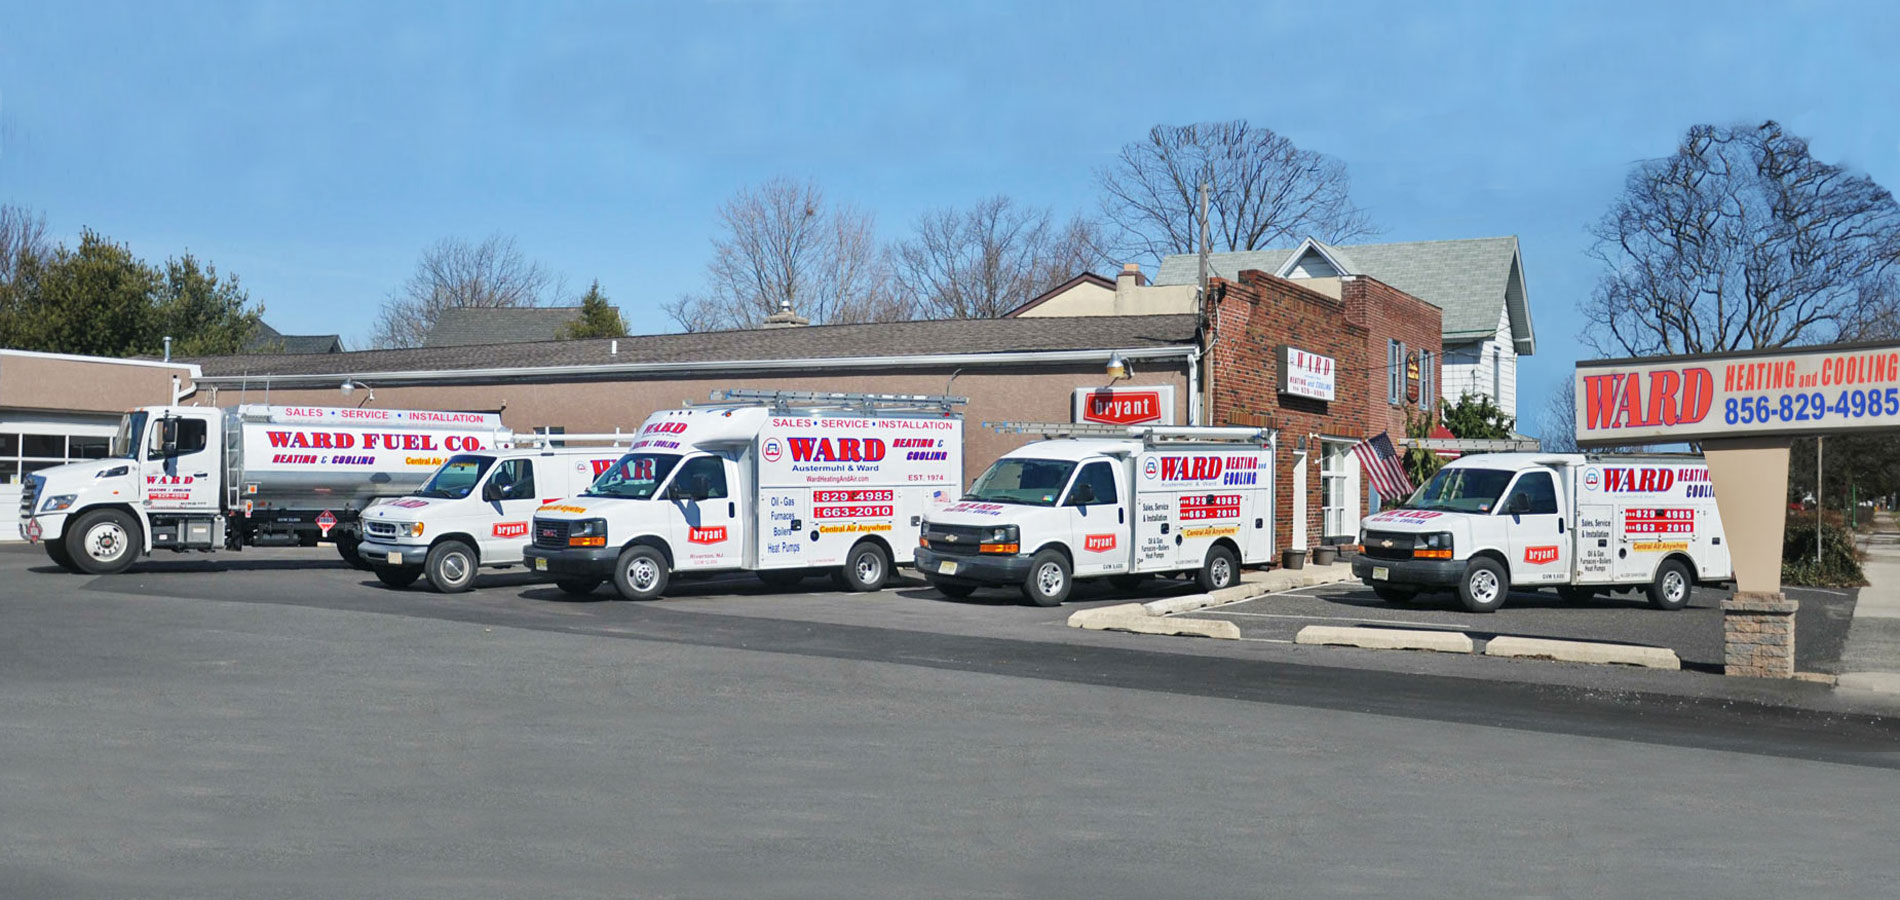 Ward Heating, Heating Oil & Air Conditioning | South Jersey